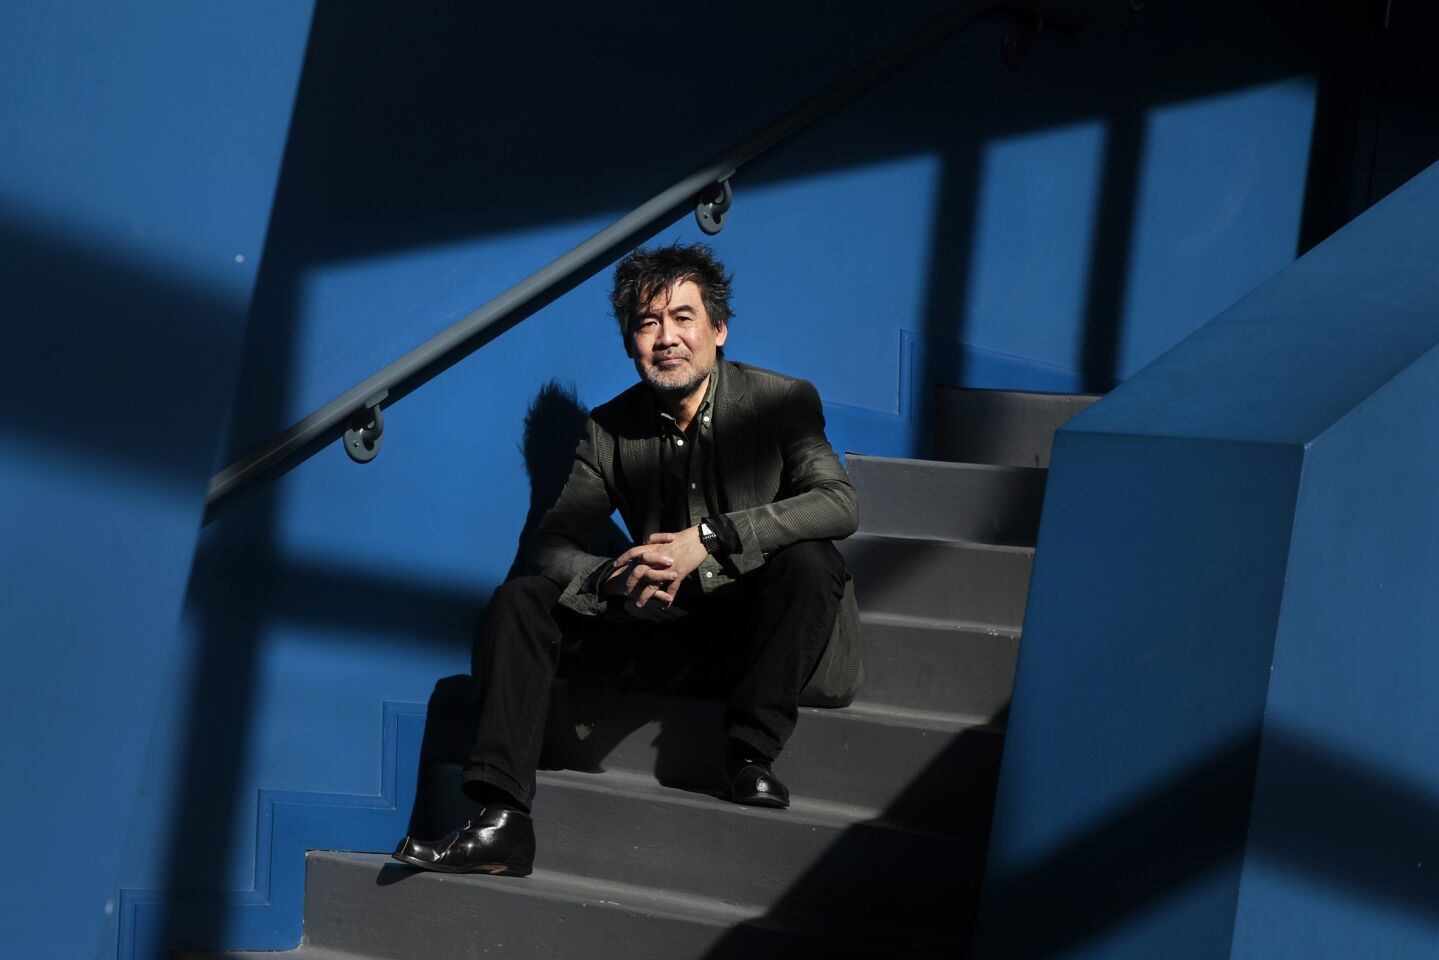 Playwright David Henry Hwang's 2007 play "Yellow Face" is being adapted to film and was recently shot in 12 days on the campus of East Los Angeles College, where this portrait was taken. MORE: For David Henry Hwang's 'Chinglish,' a case of bad timing in China